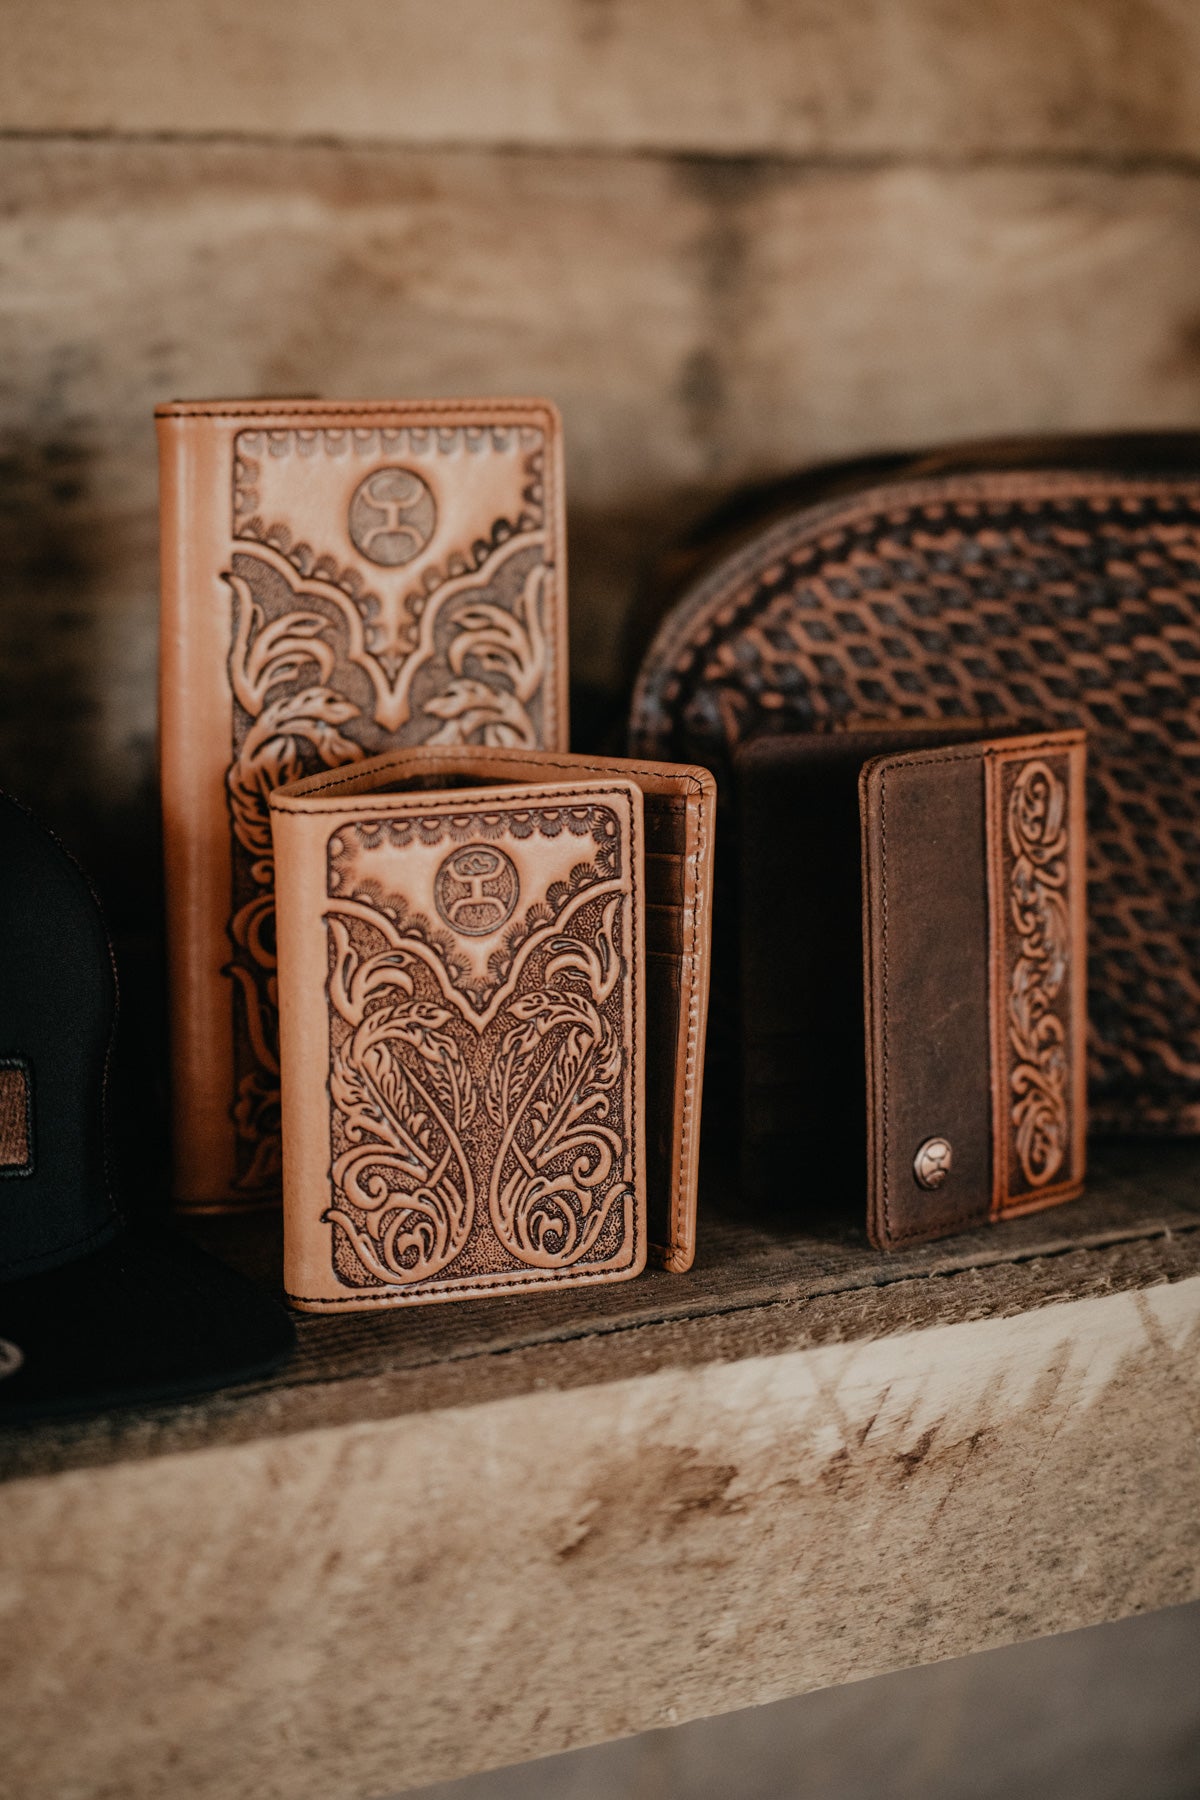 Hooey "Phoenix" Tooled Leather Trifold Wallet with Black Leather Inlay